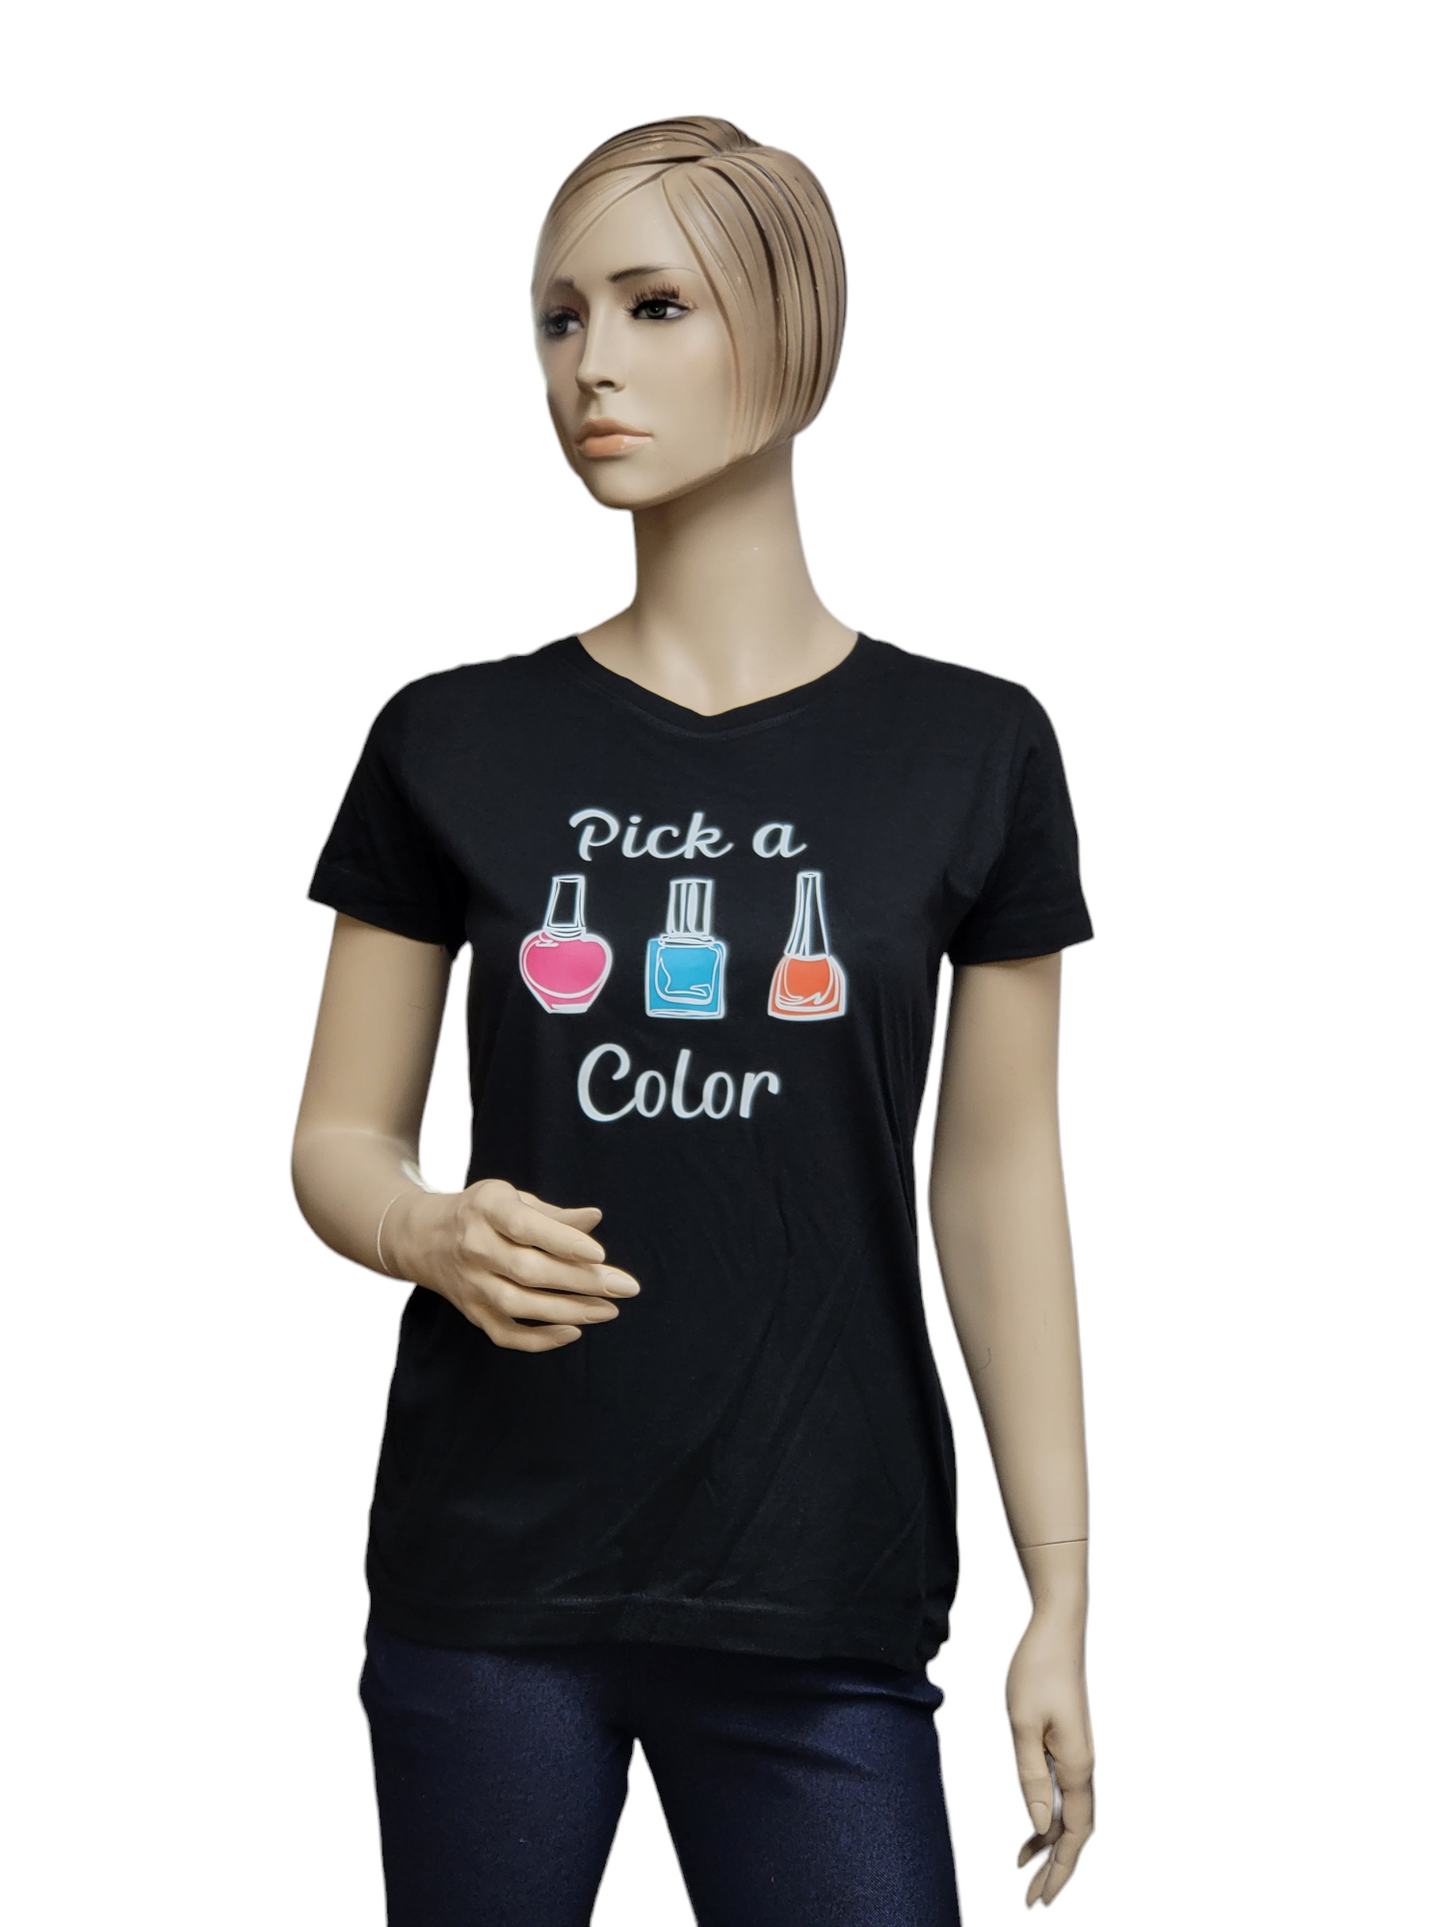 Classic Cotton T shirt "Pick a Color "with Round Neck